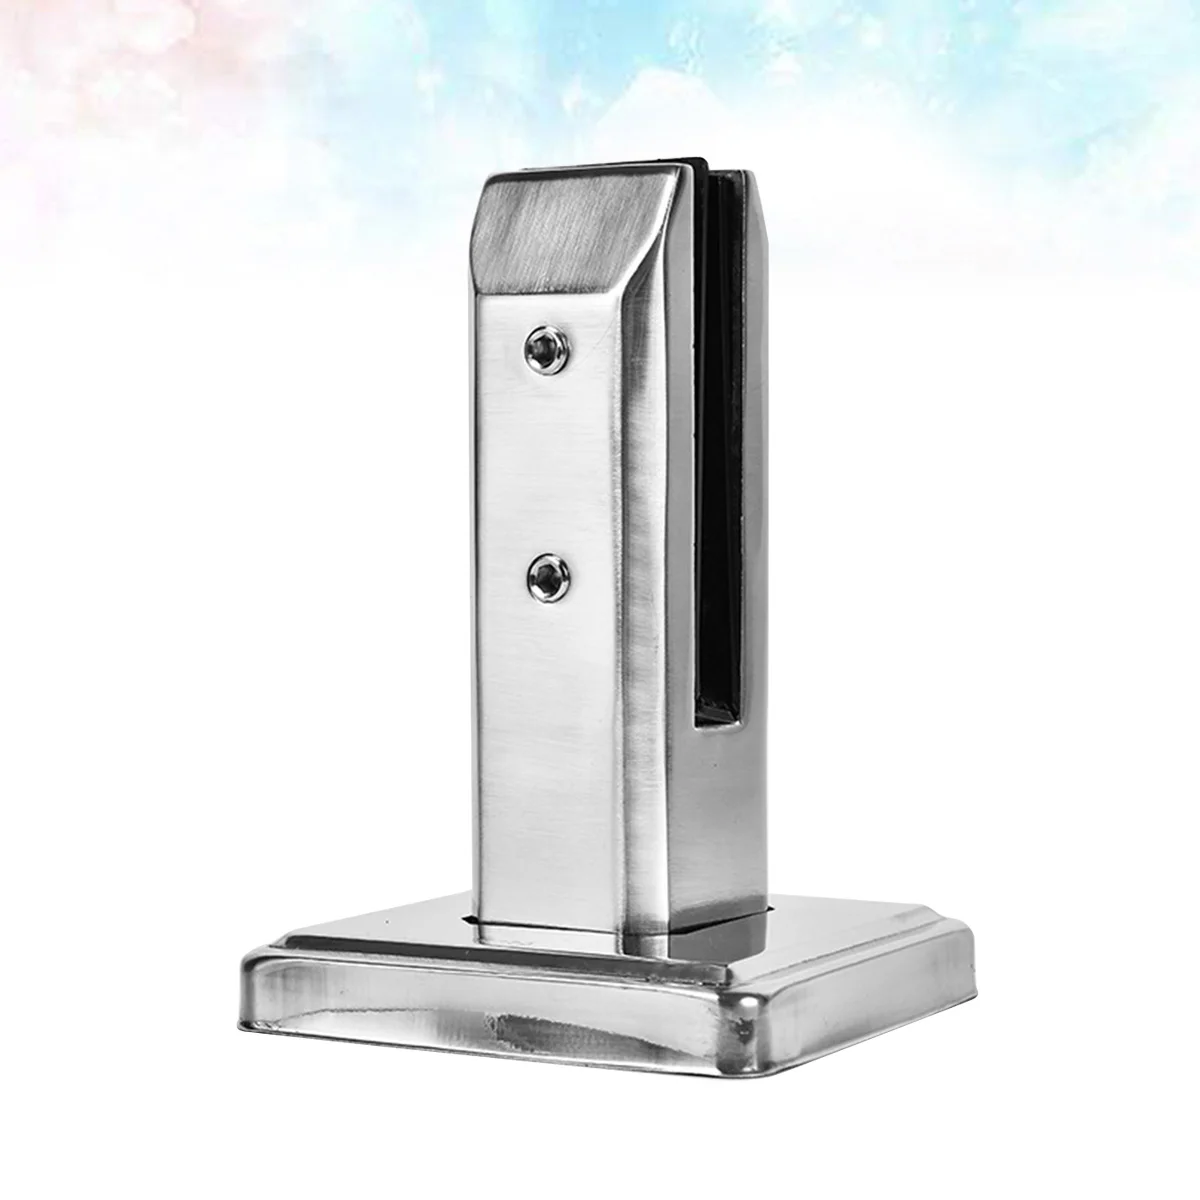 

Stainless Steel Glass Clamp Punch Free Glass Staircase Bracket Hinge Staircase Railing Degree Installation Glass Stand Clamp